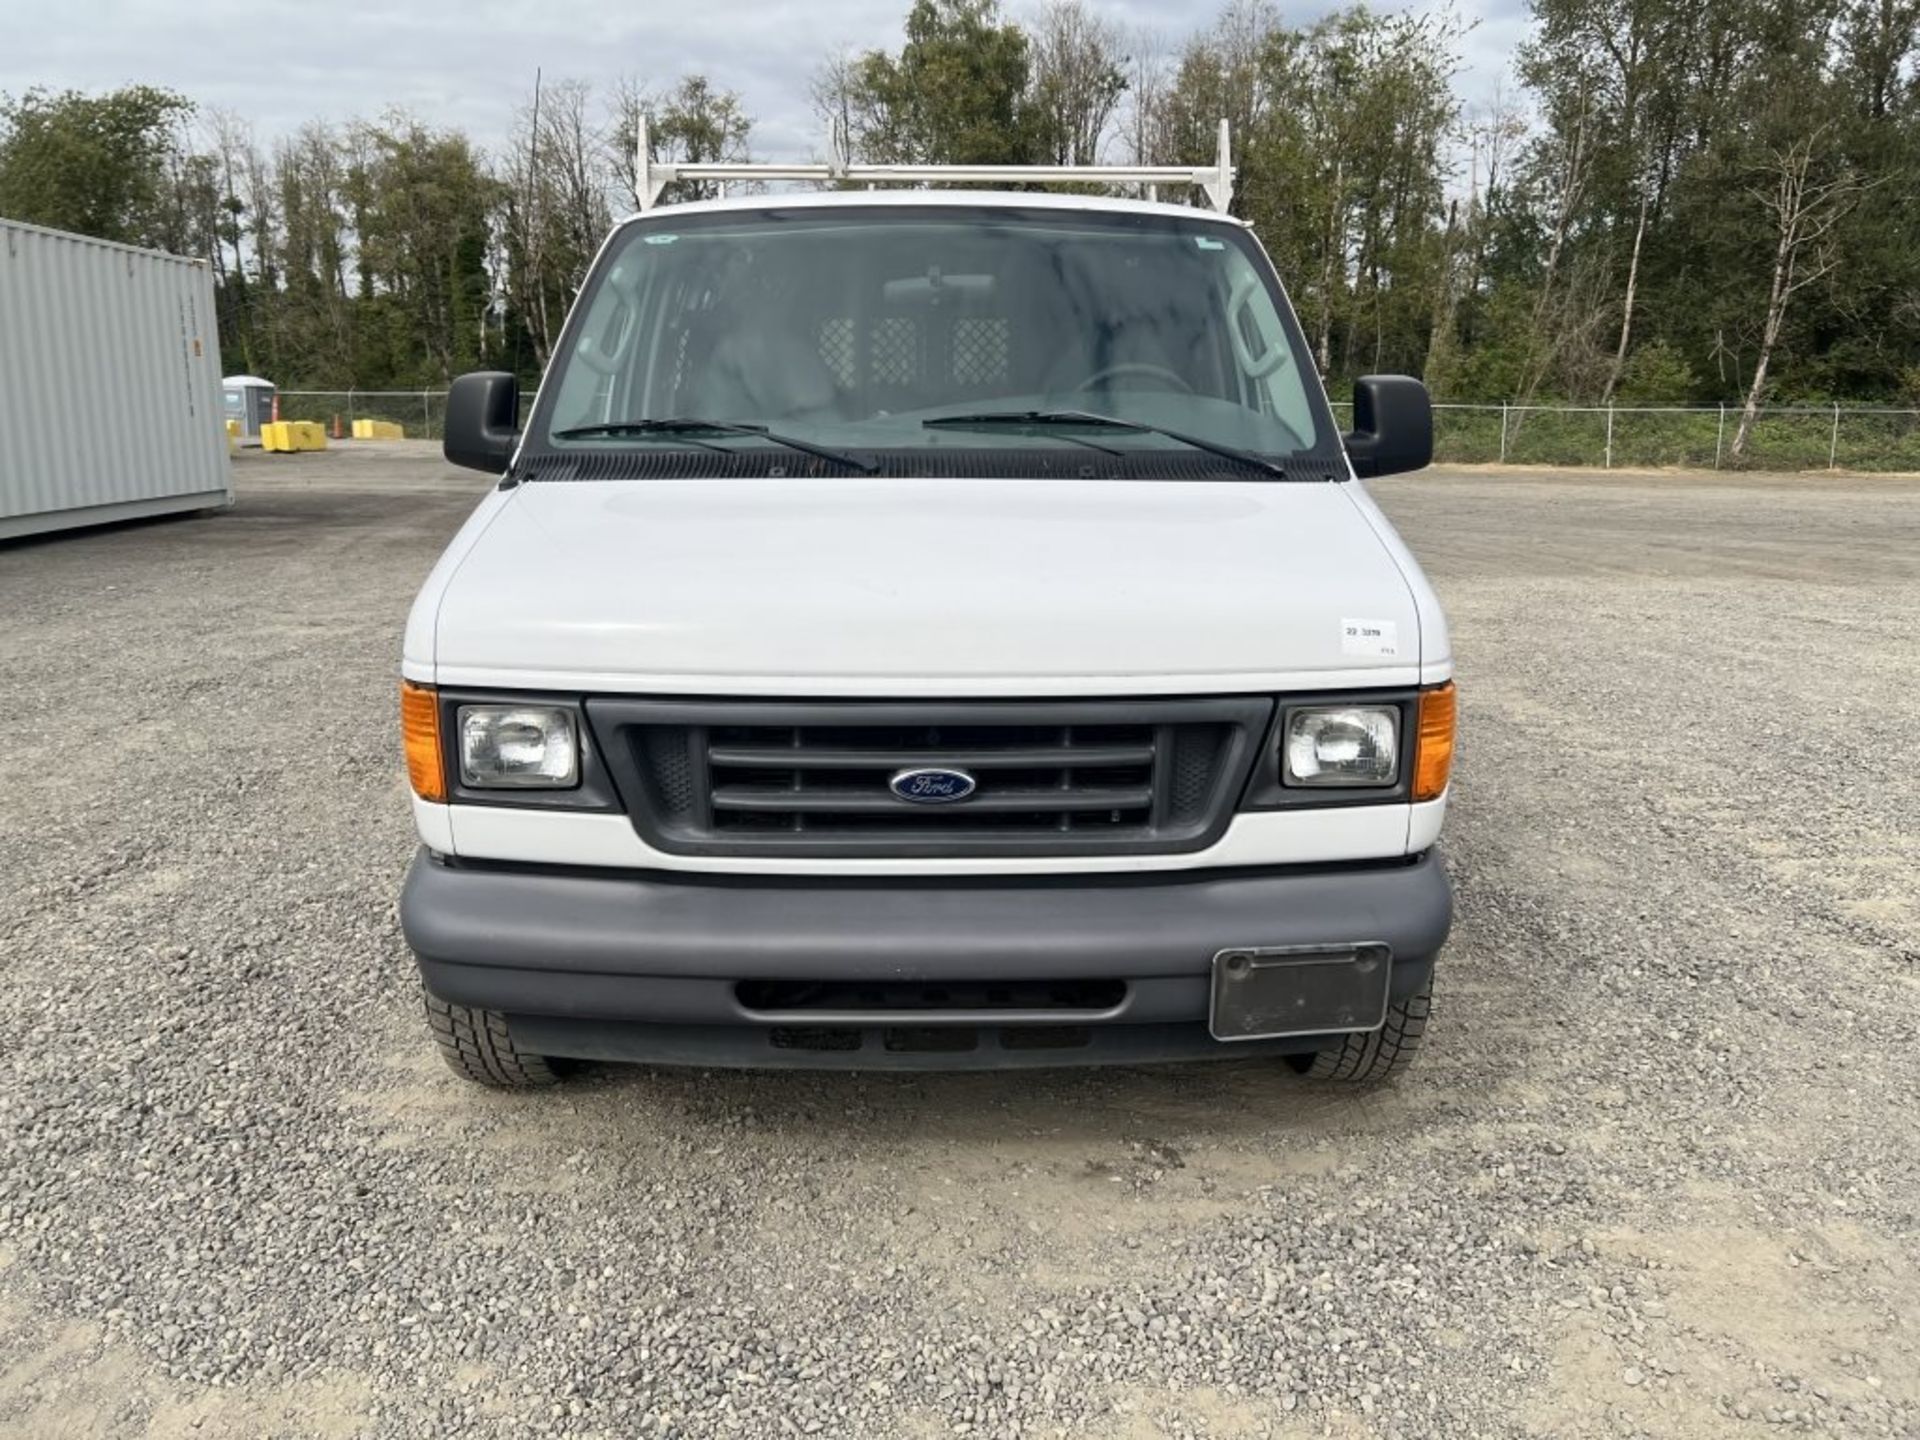 2006 Ford E150 Cargo Van - Image 8 of 21